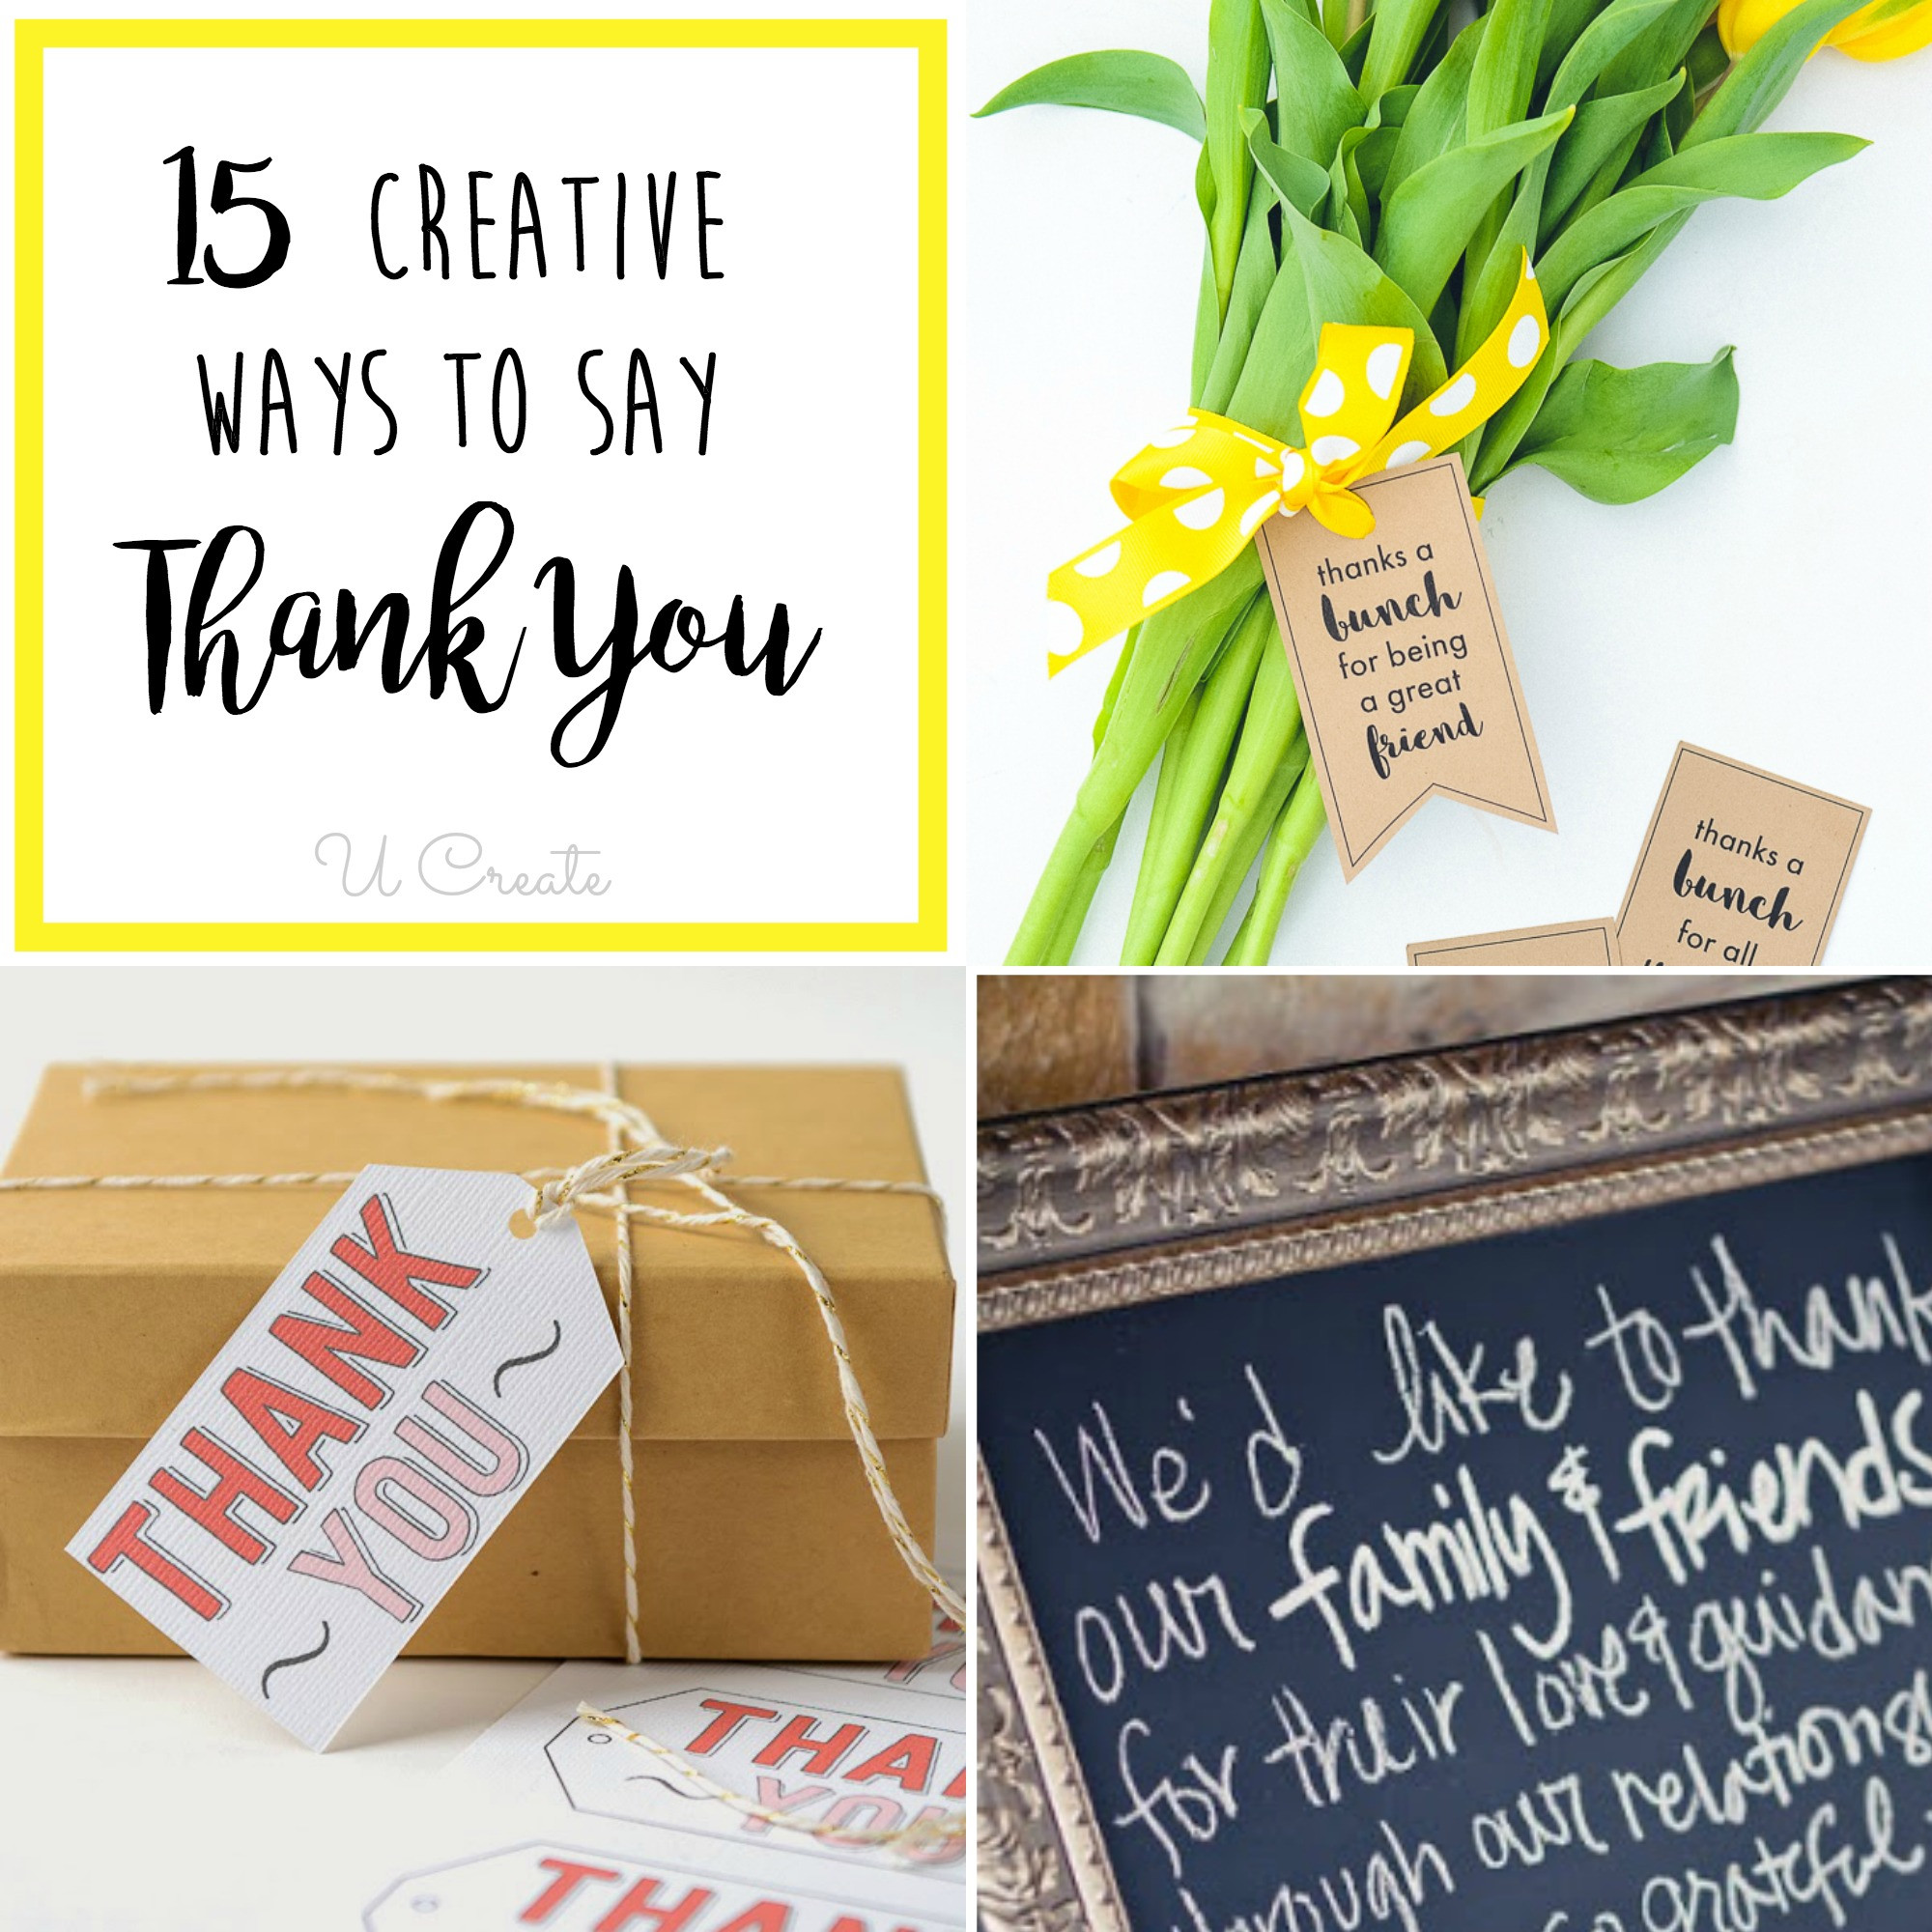 Gift Ideas To Say Thank You For Helping
 15 Creative Ways to Say Thank You